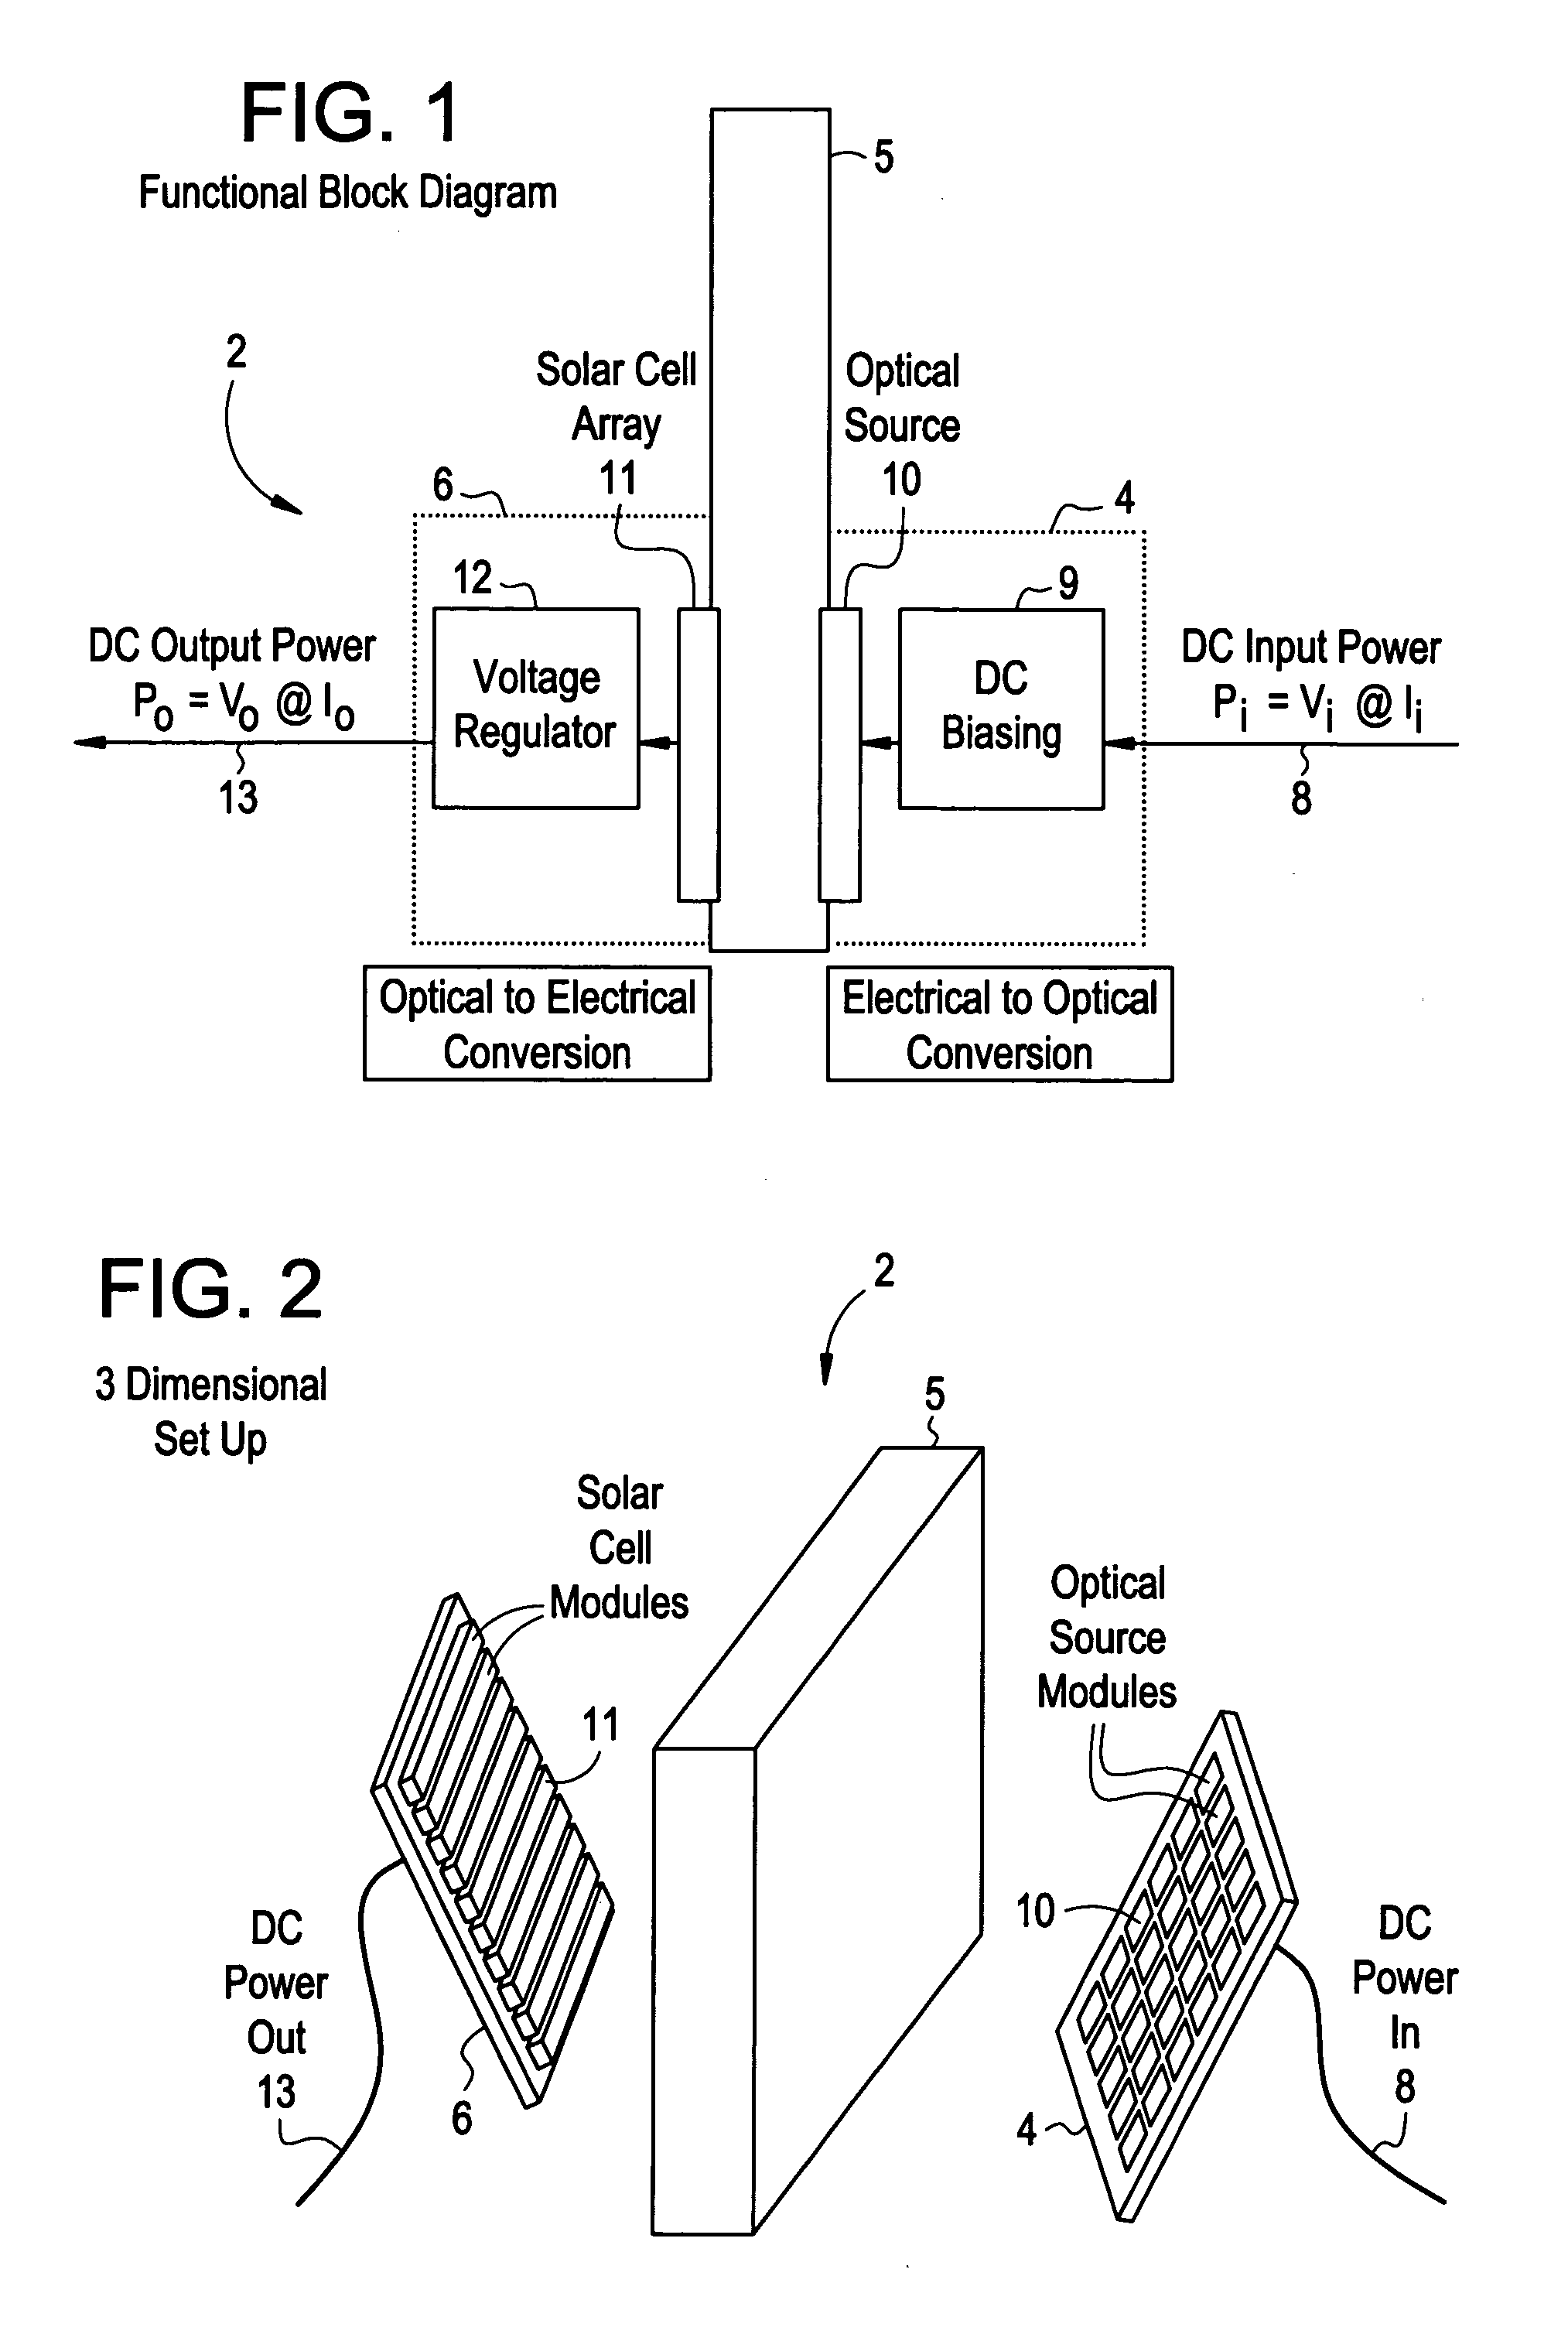 Apparatus and method for transferring DC power and RF signals through a transparent or substantially transparent medium for antenna reception